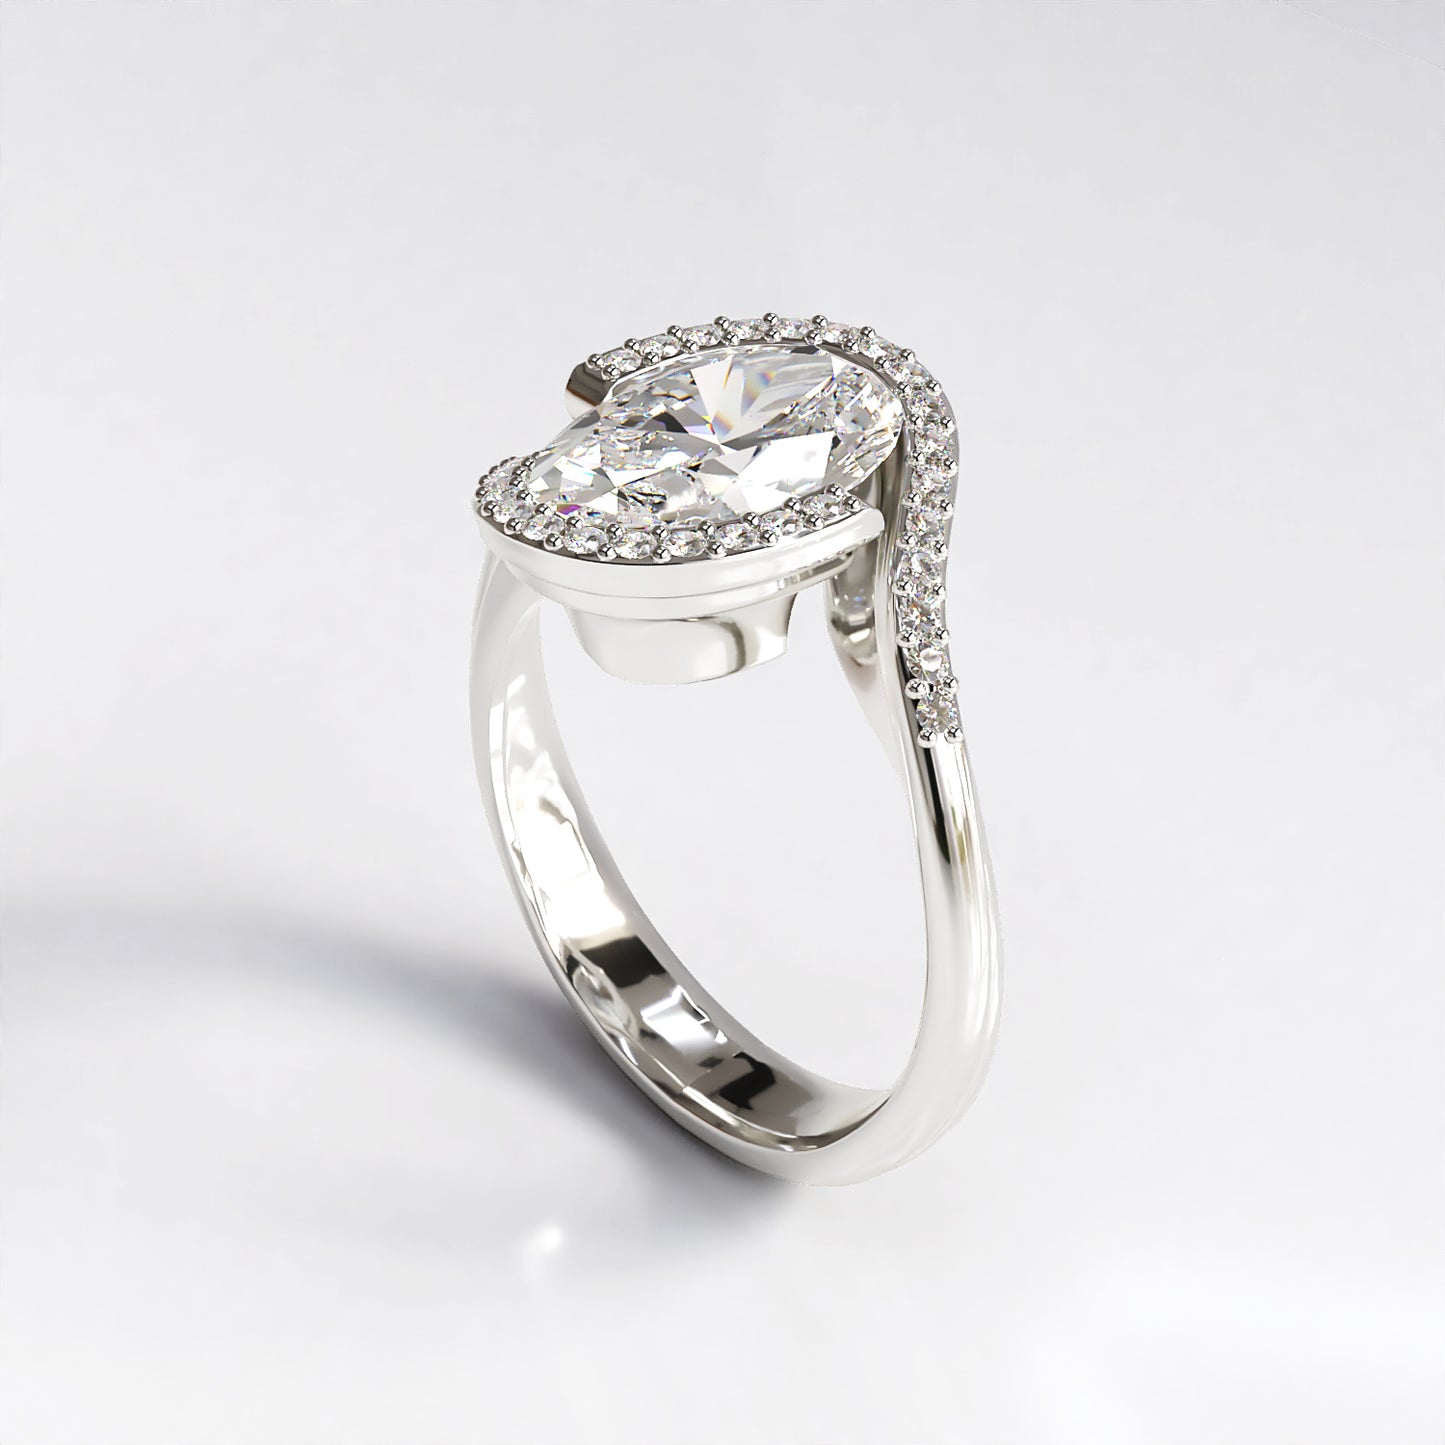 Oval Elegance: 2ct Diamond Engagement Ring in 18ct White Gold